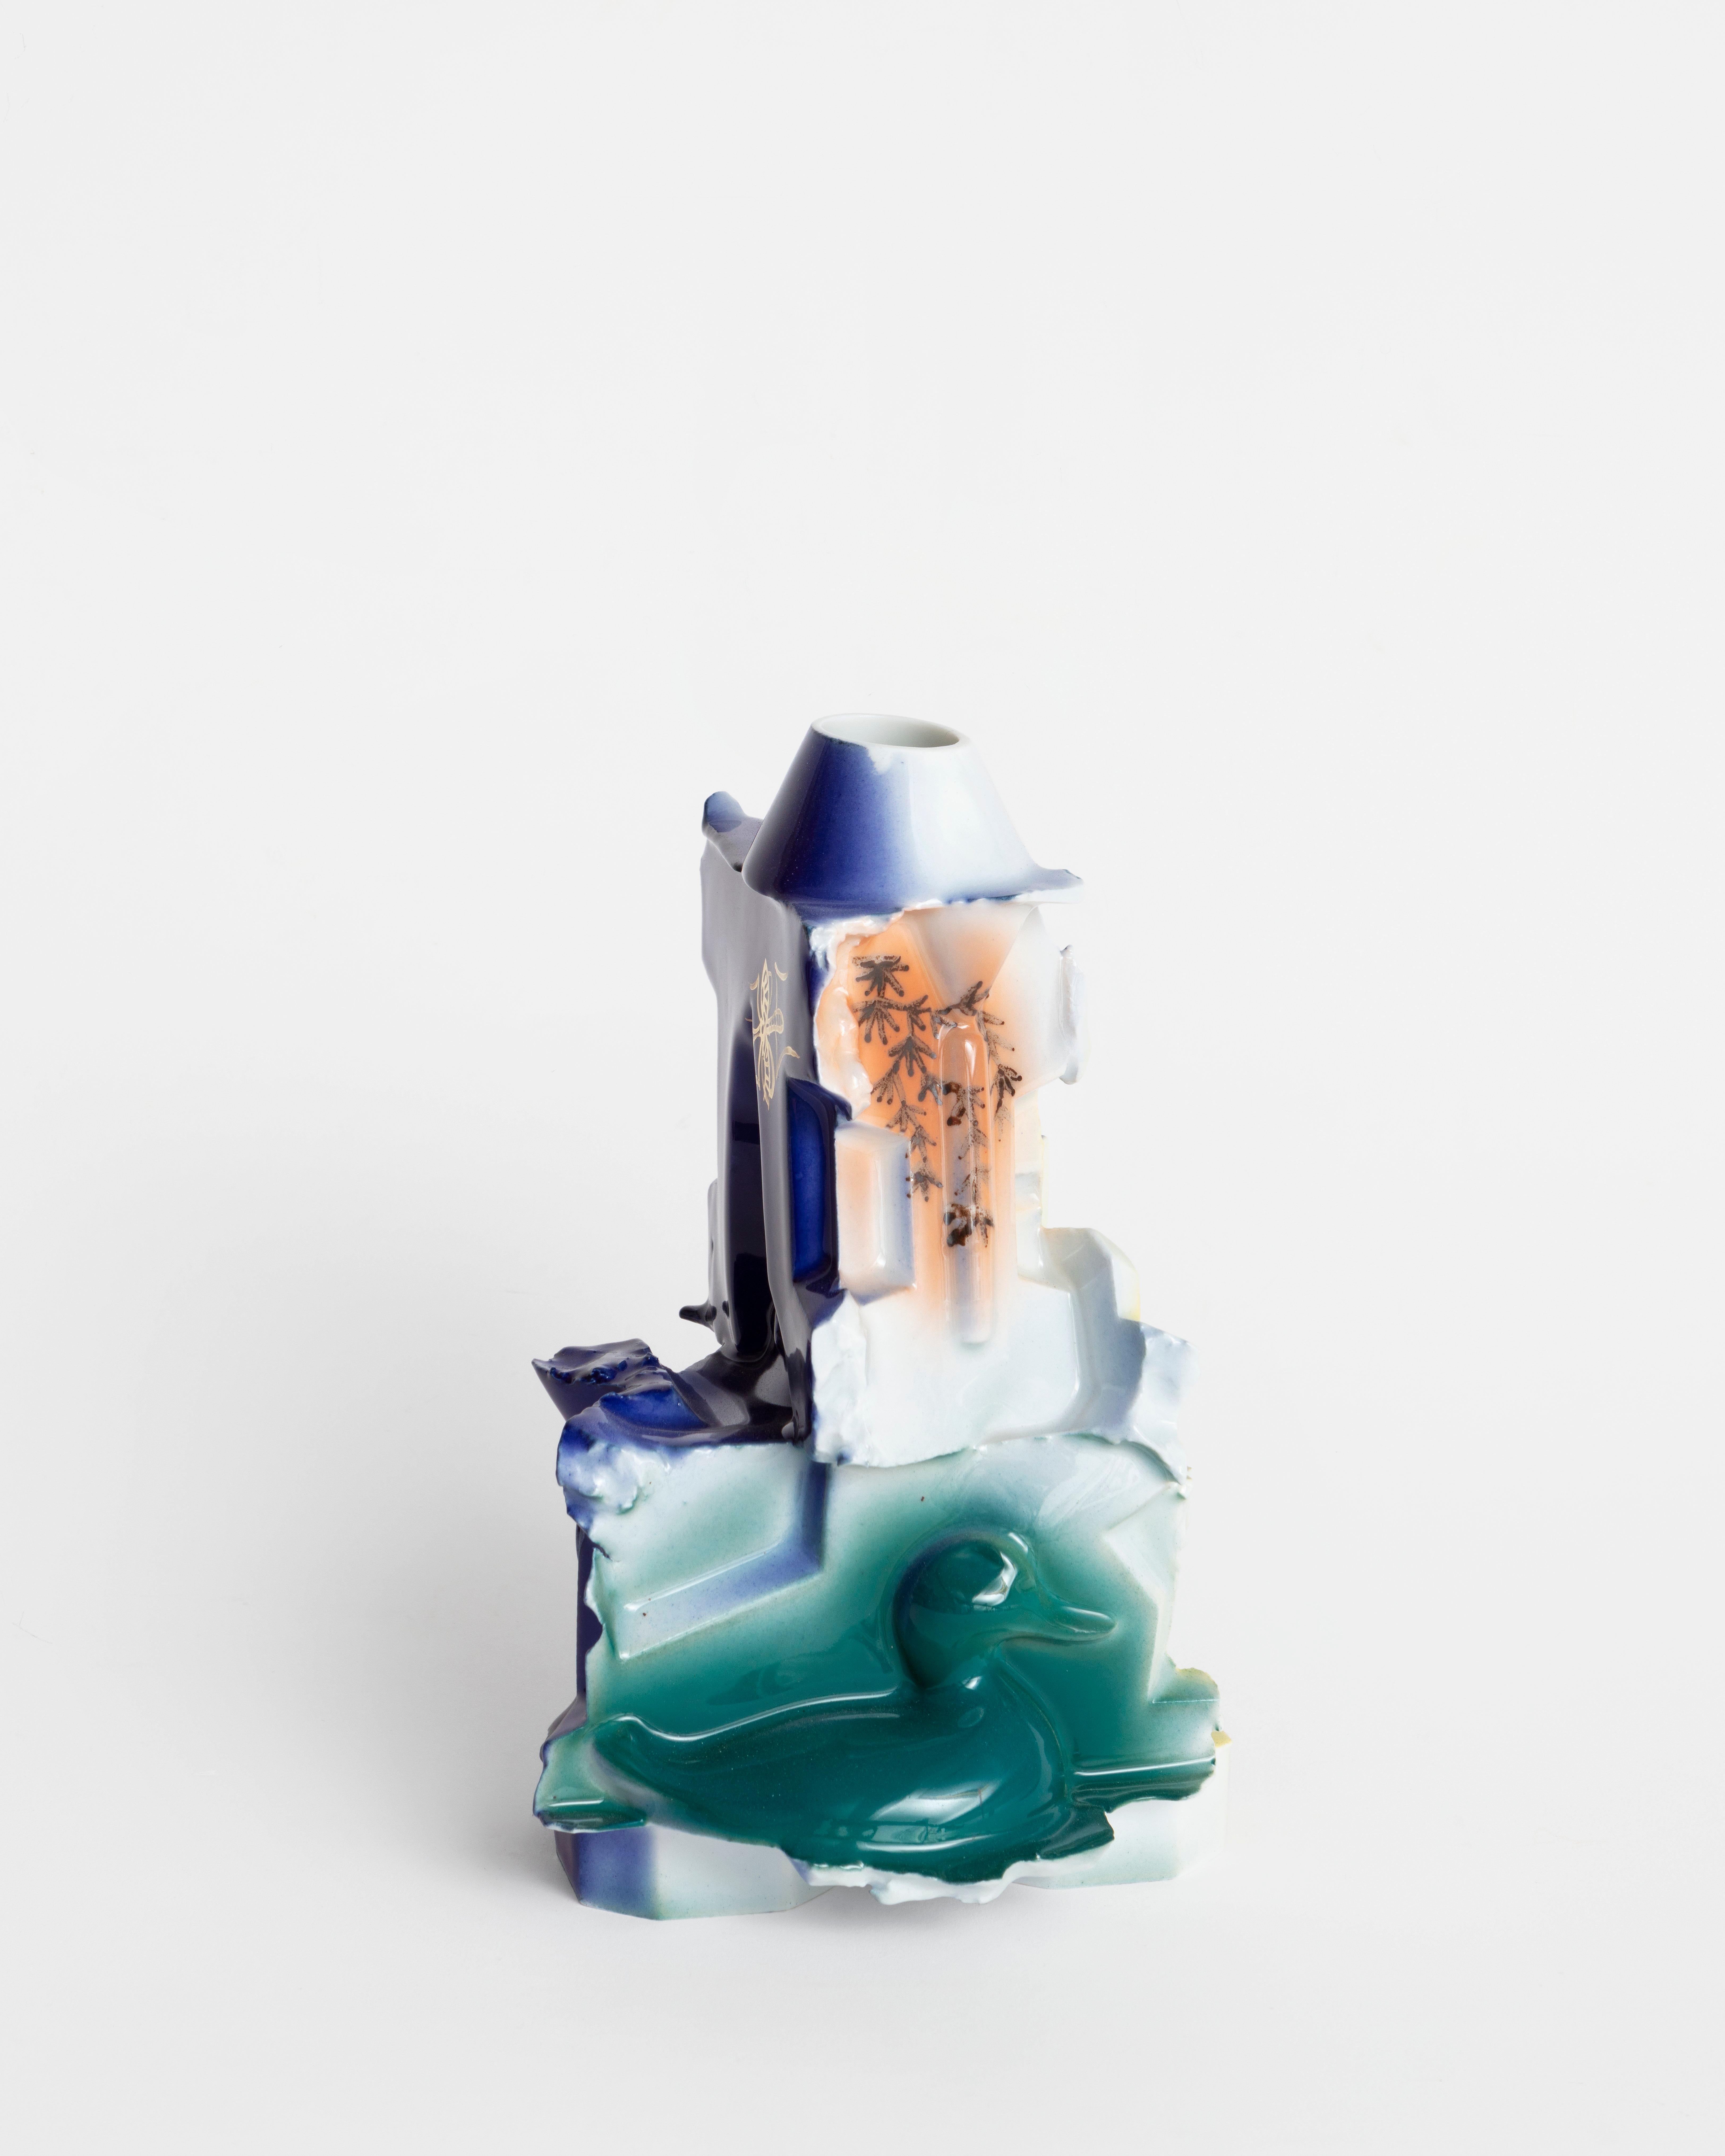 “Meta(st)ases is a series of works conceptualized around the profound essence of the vase. 
I have been obsessed
with this shape for a long time, but it became clear that I had to work on it in 2016. That year, I began a research residency on the